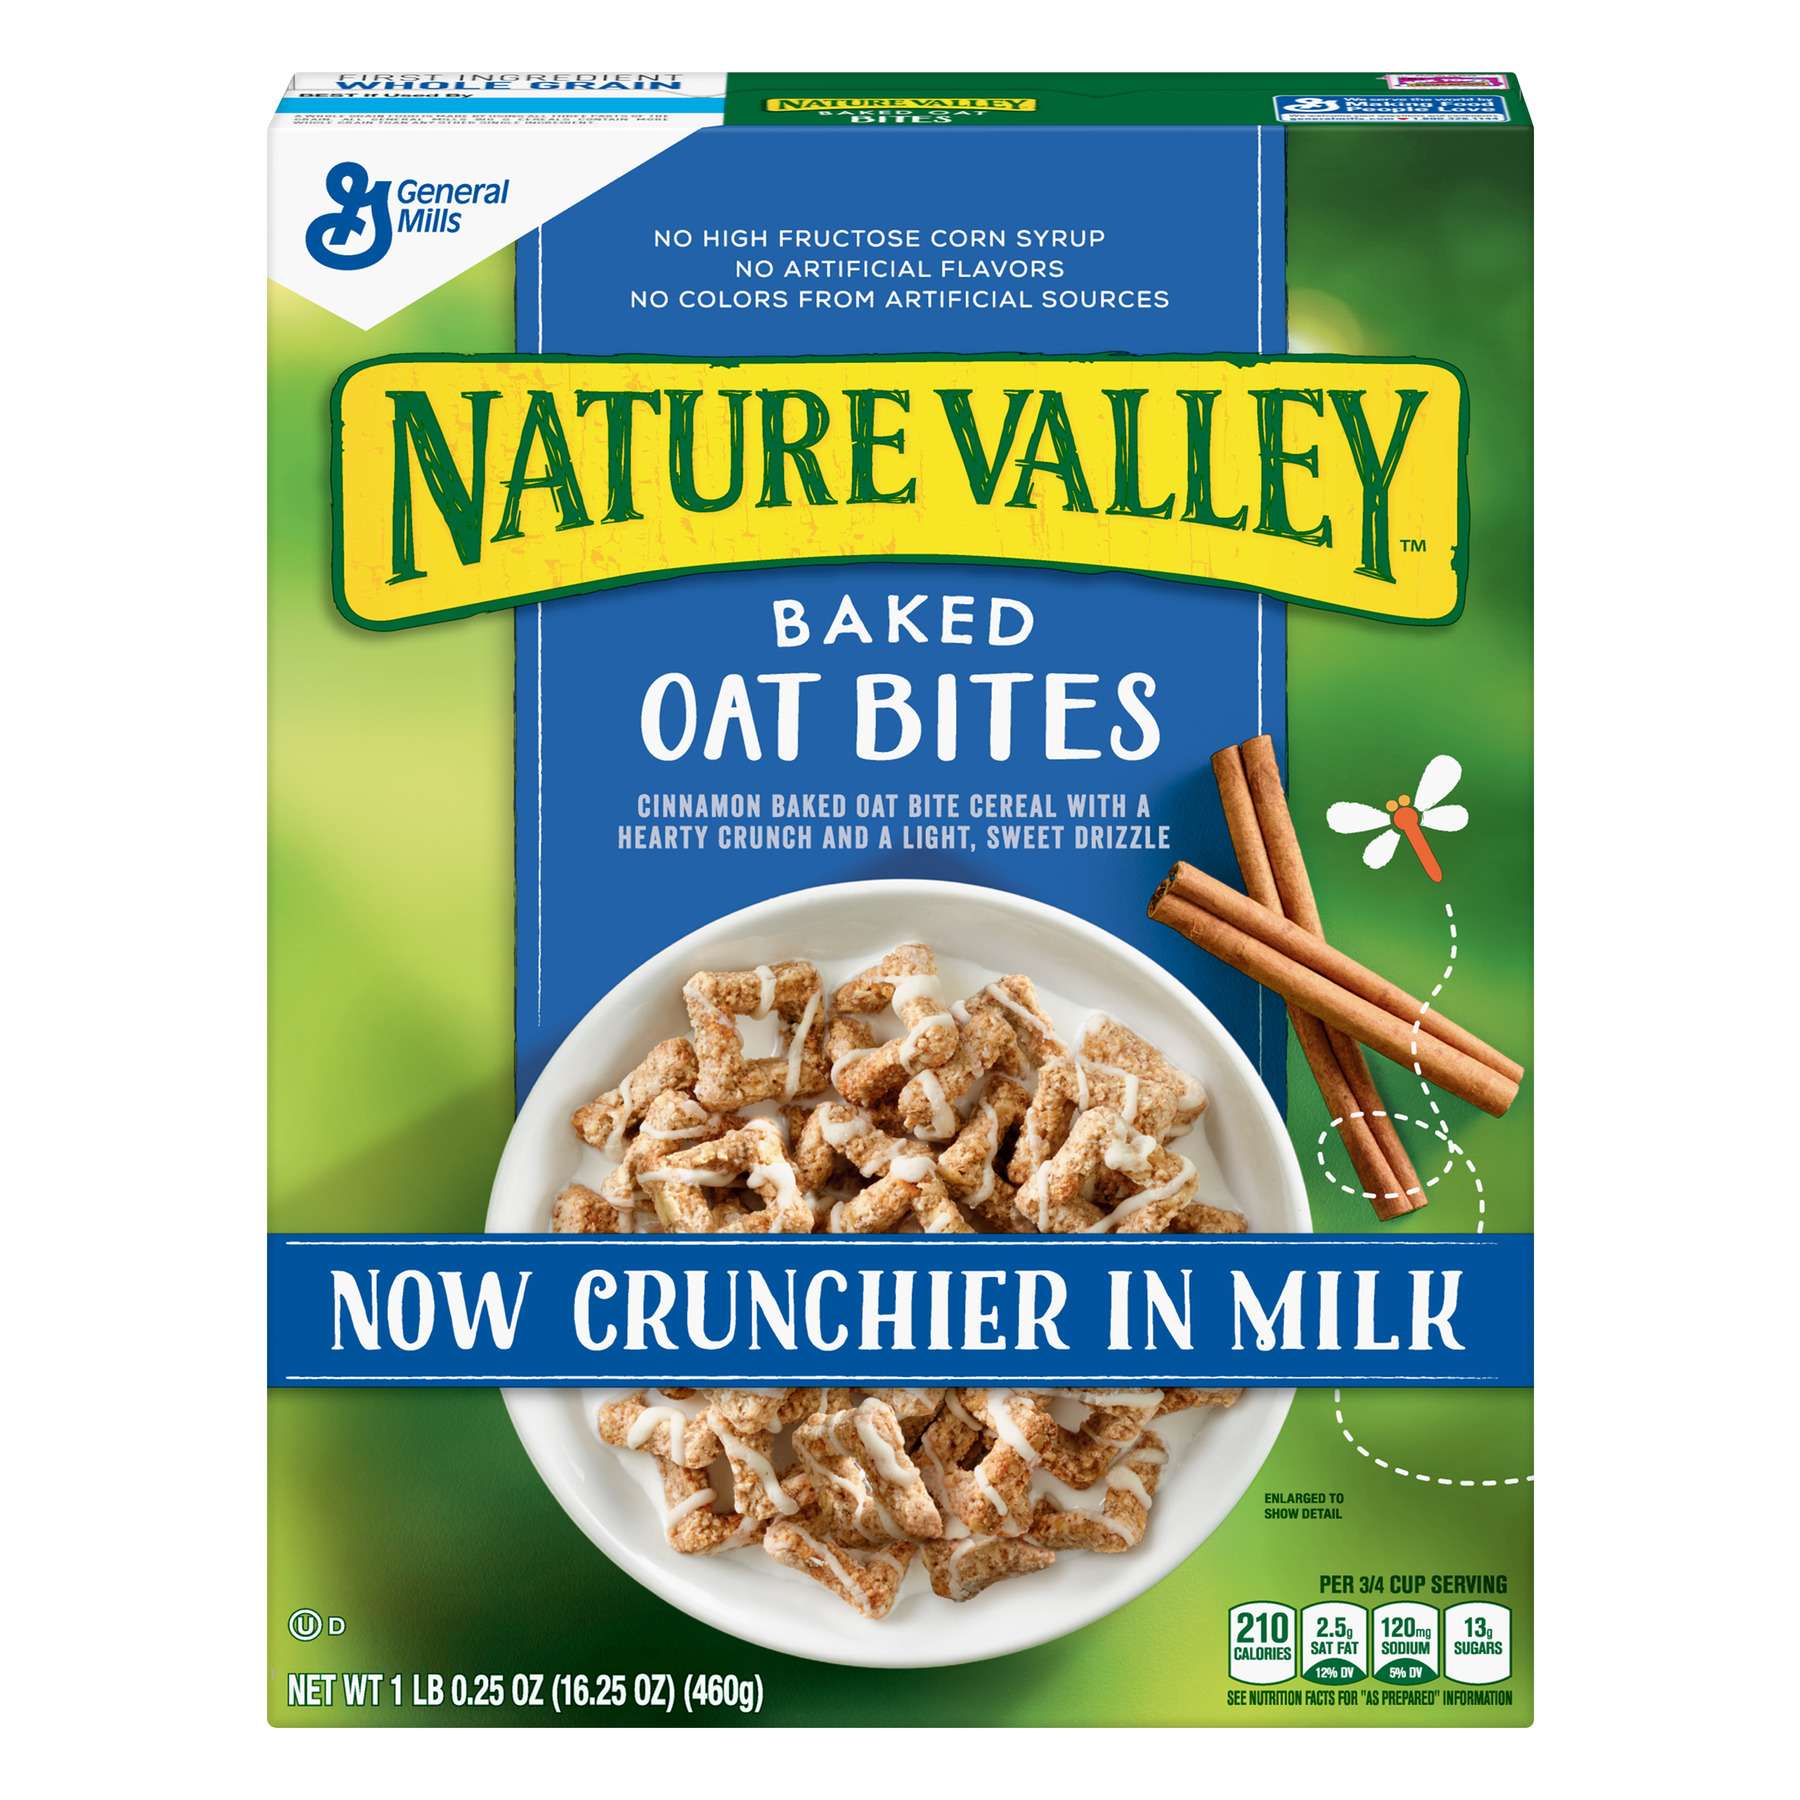 Nature Valley Cereal, Baked Oat Bites, 16.25 oz Box ...